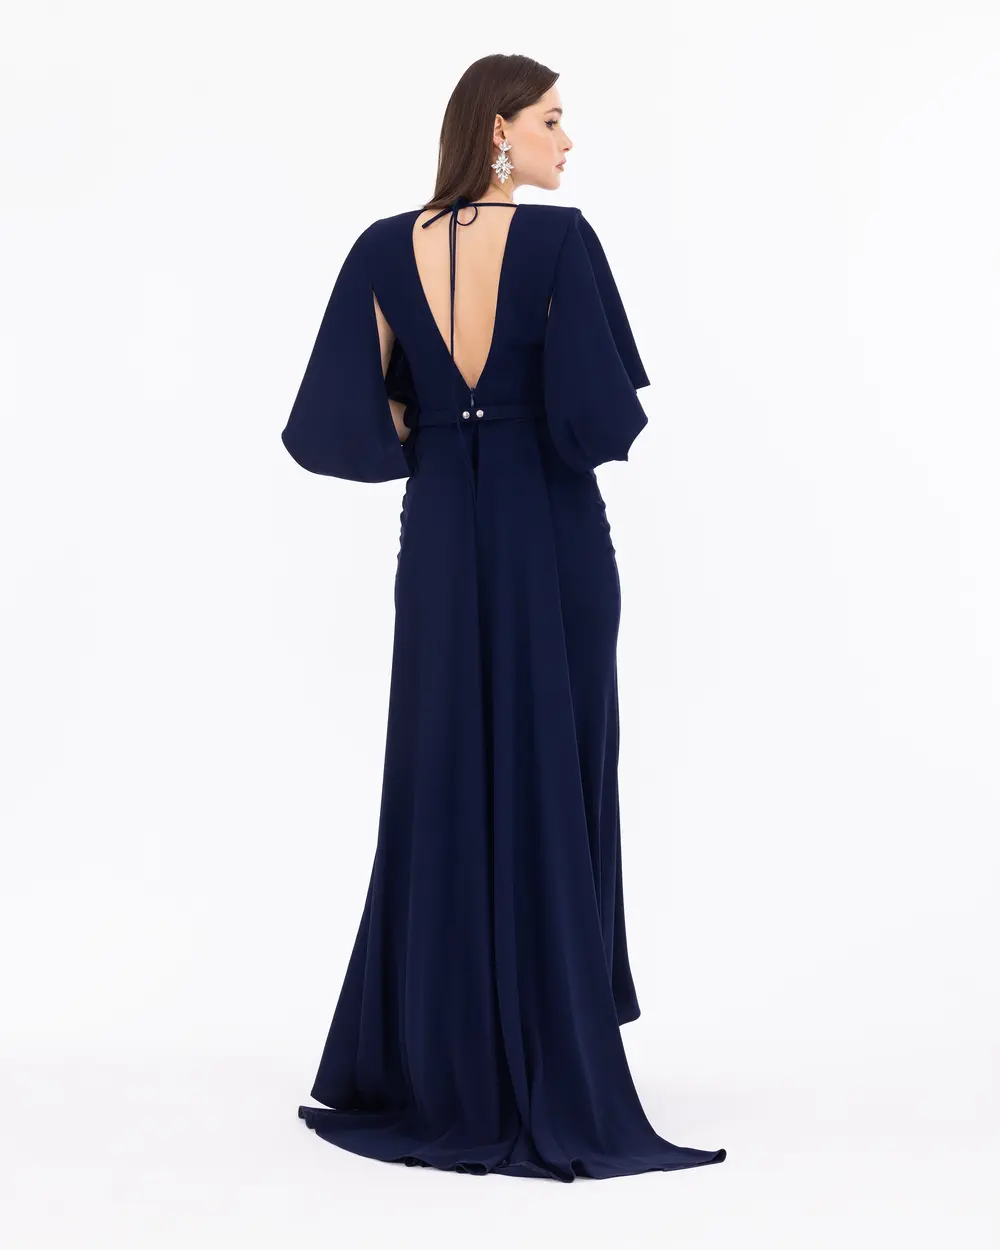 Arched Fish Form Crepe Fabric Evening Dress